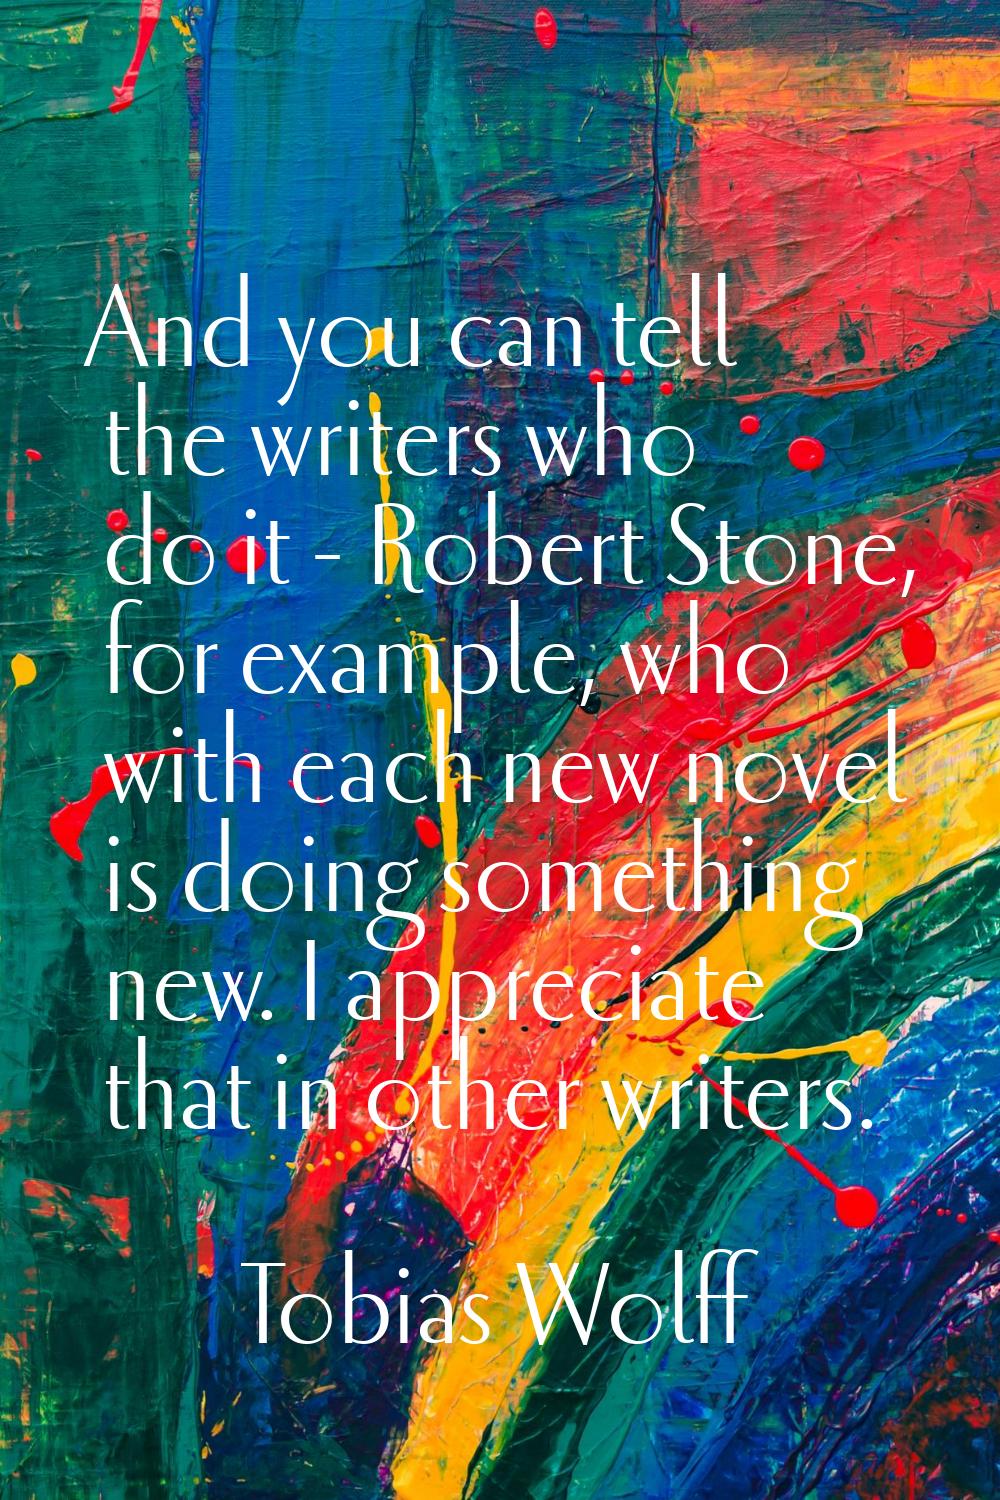 And you can tell the writers who do it - Robert Stone, for example, who with each new novel is doin